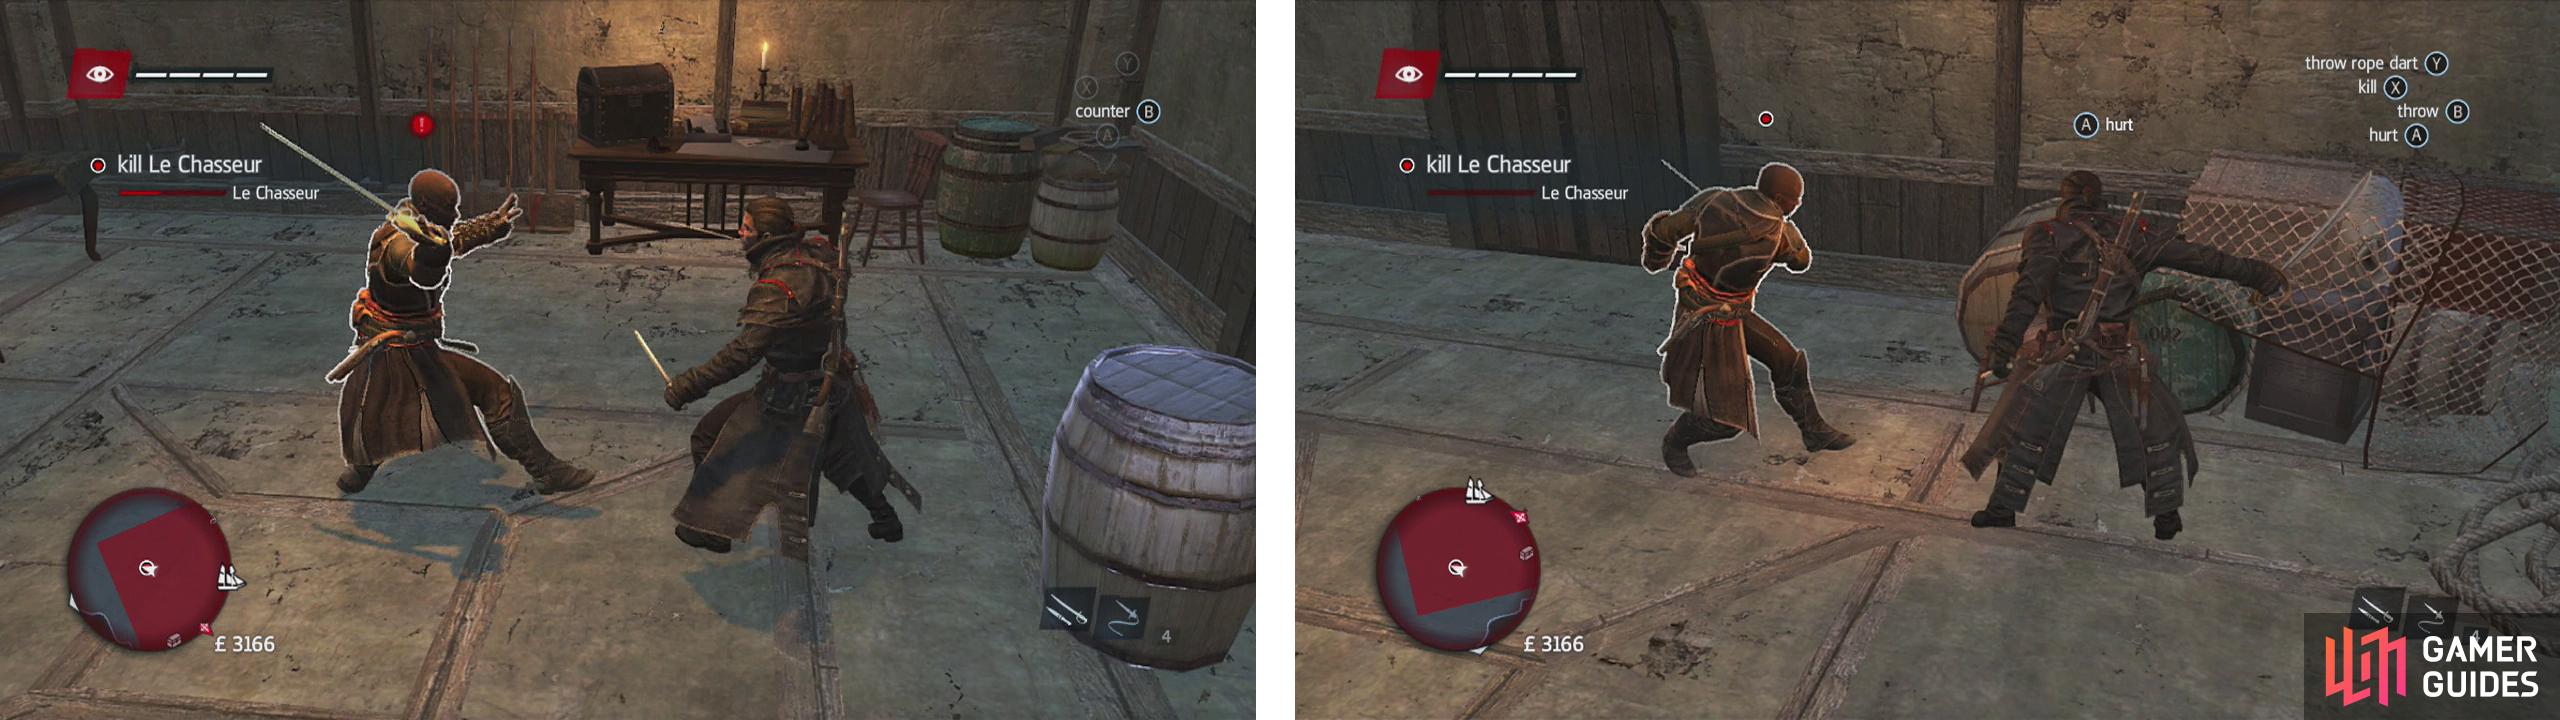 Counter the target in front of barrels in the room (left). When the ‘Hurt’ pop-up appears, hit the button prompt to damage him (right).